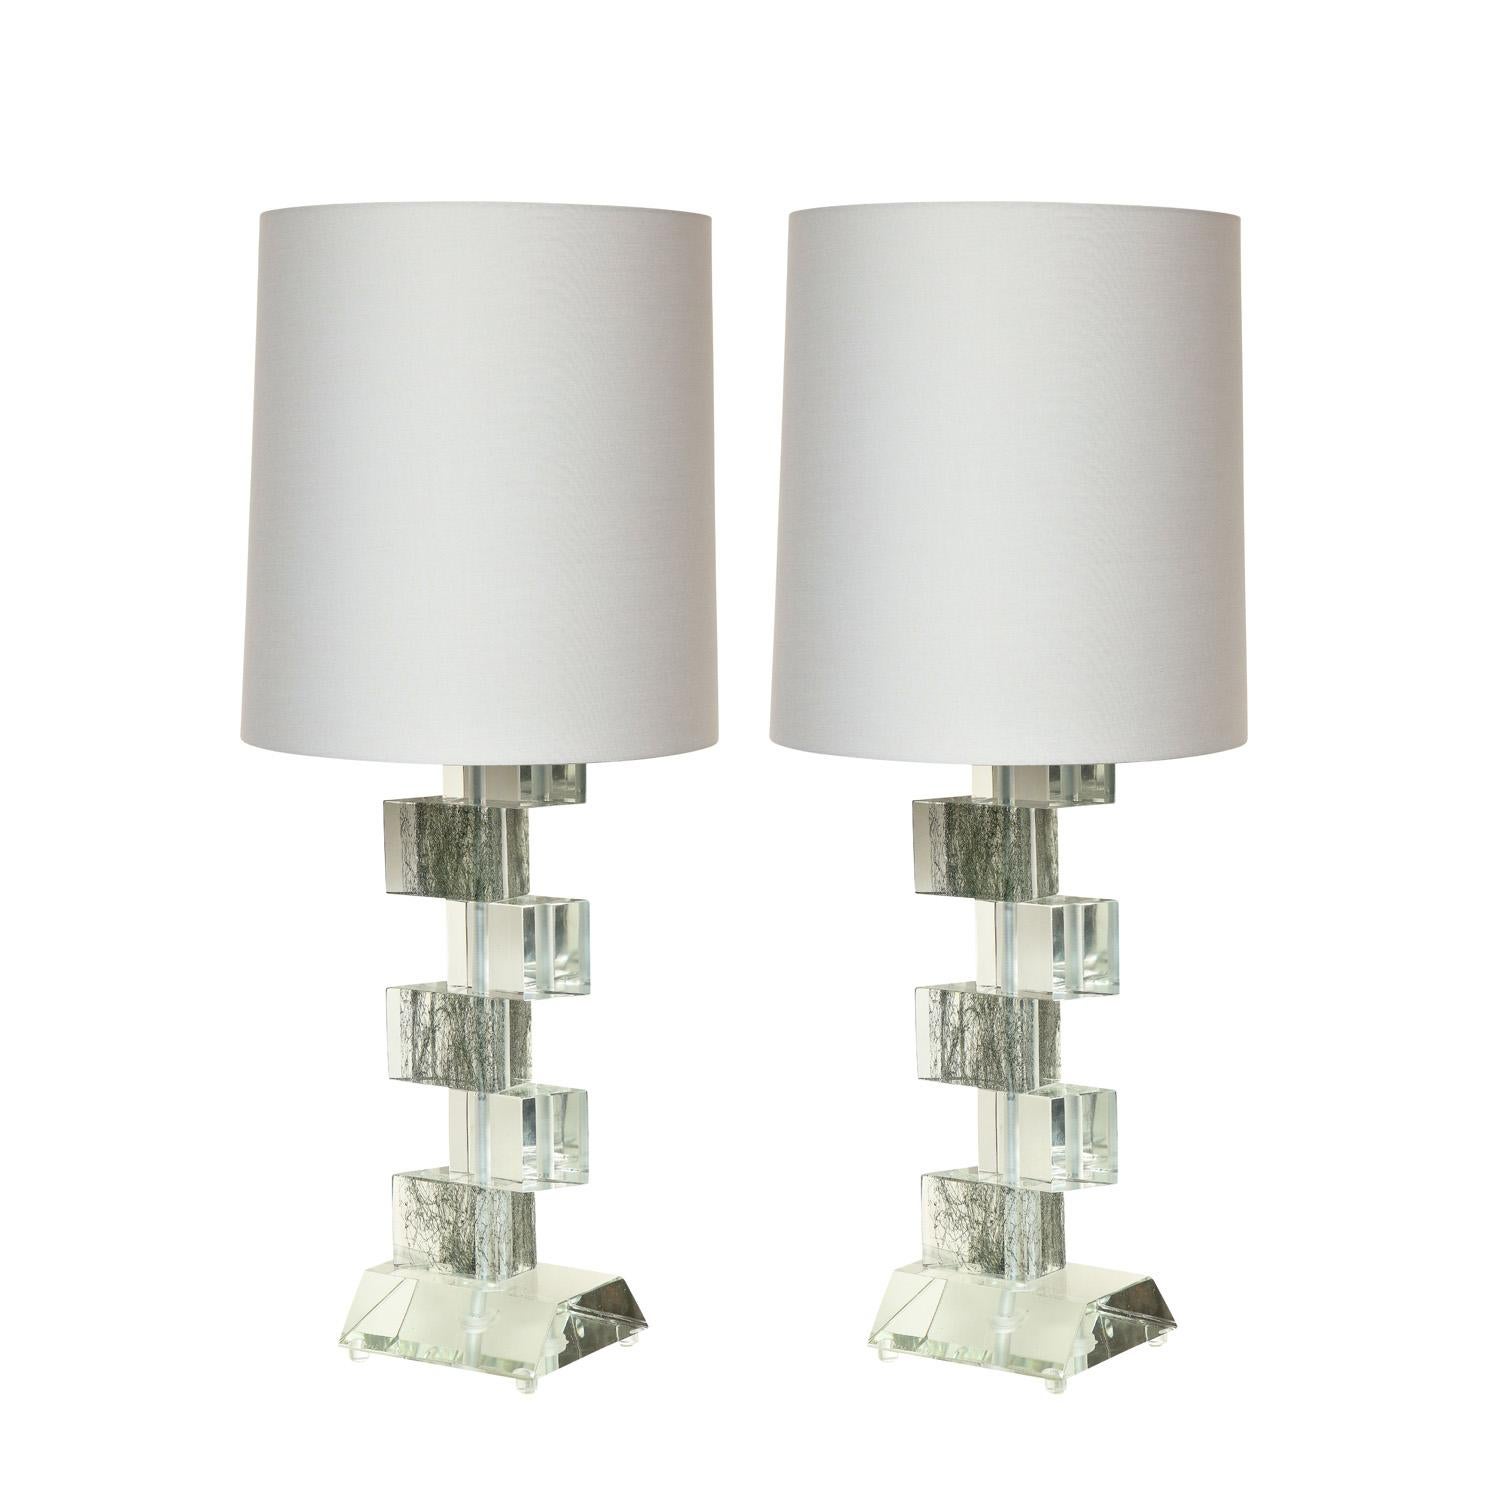 Hand made Murano clear glass block table lamps with alternating blocks of silver leaf filament inclusions, Italy 2022.

Lampshades are sold separately.